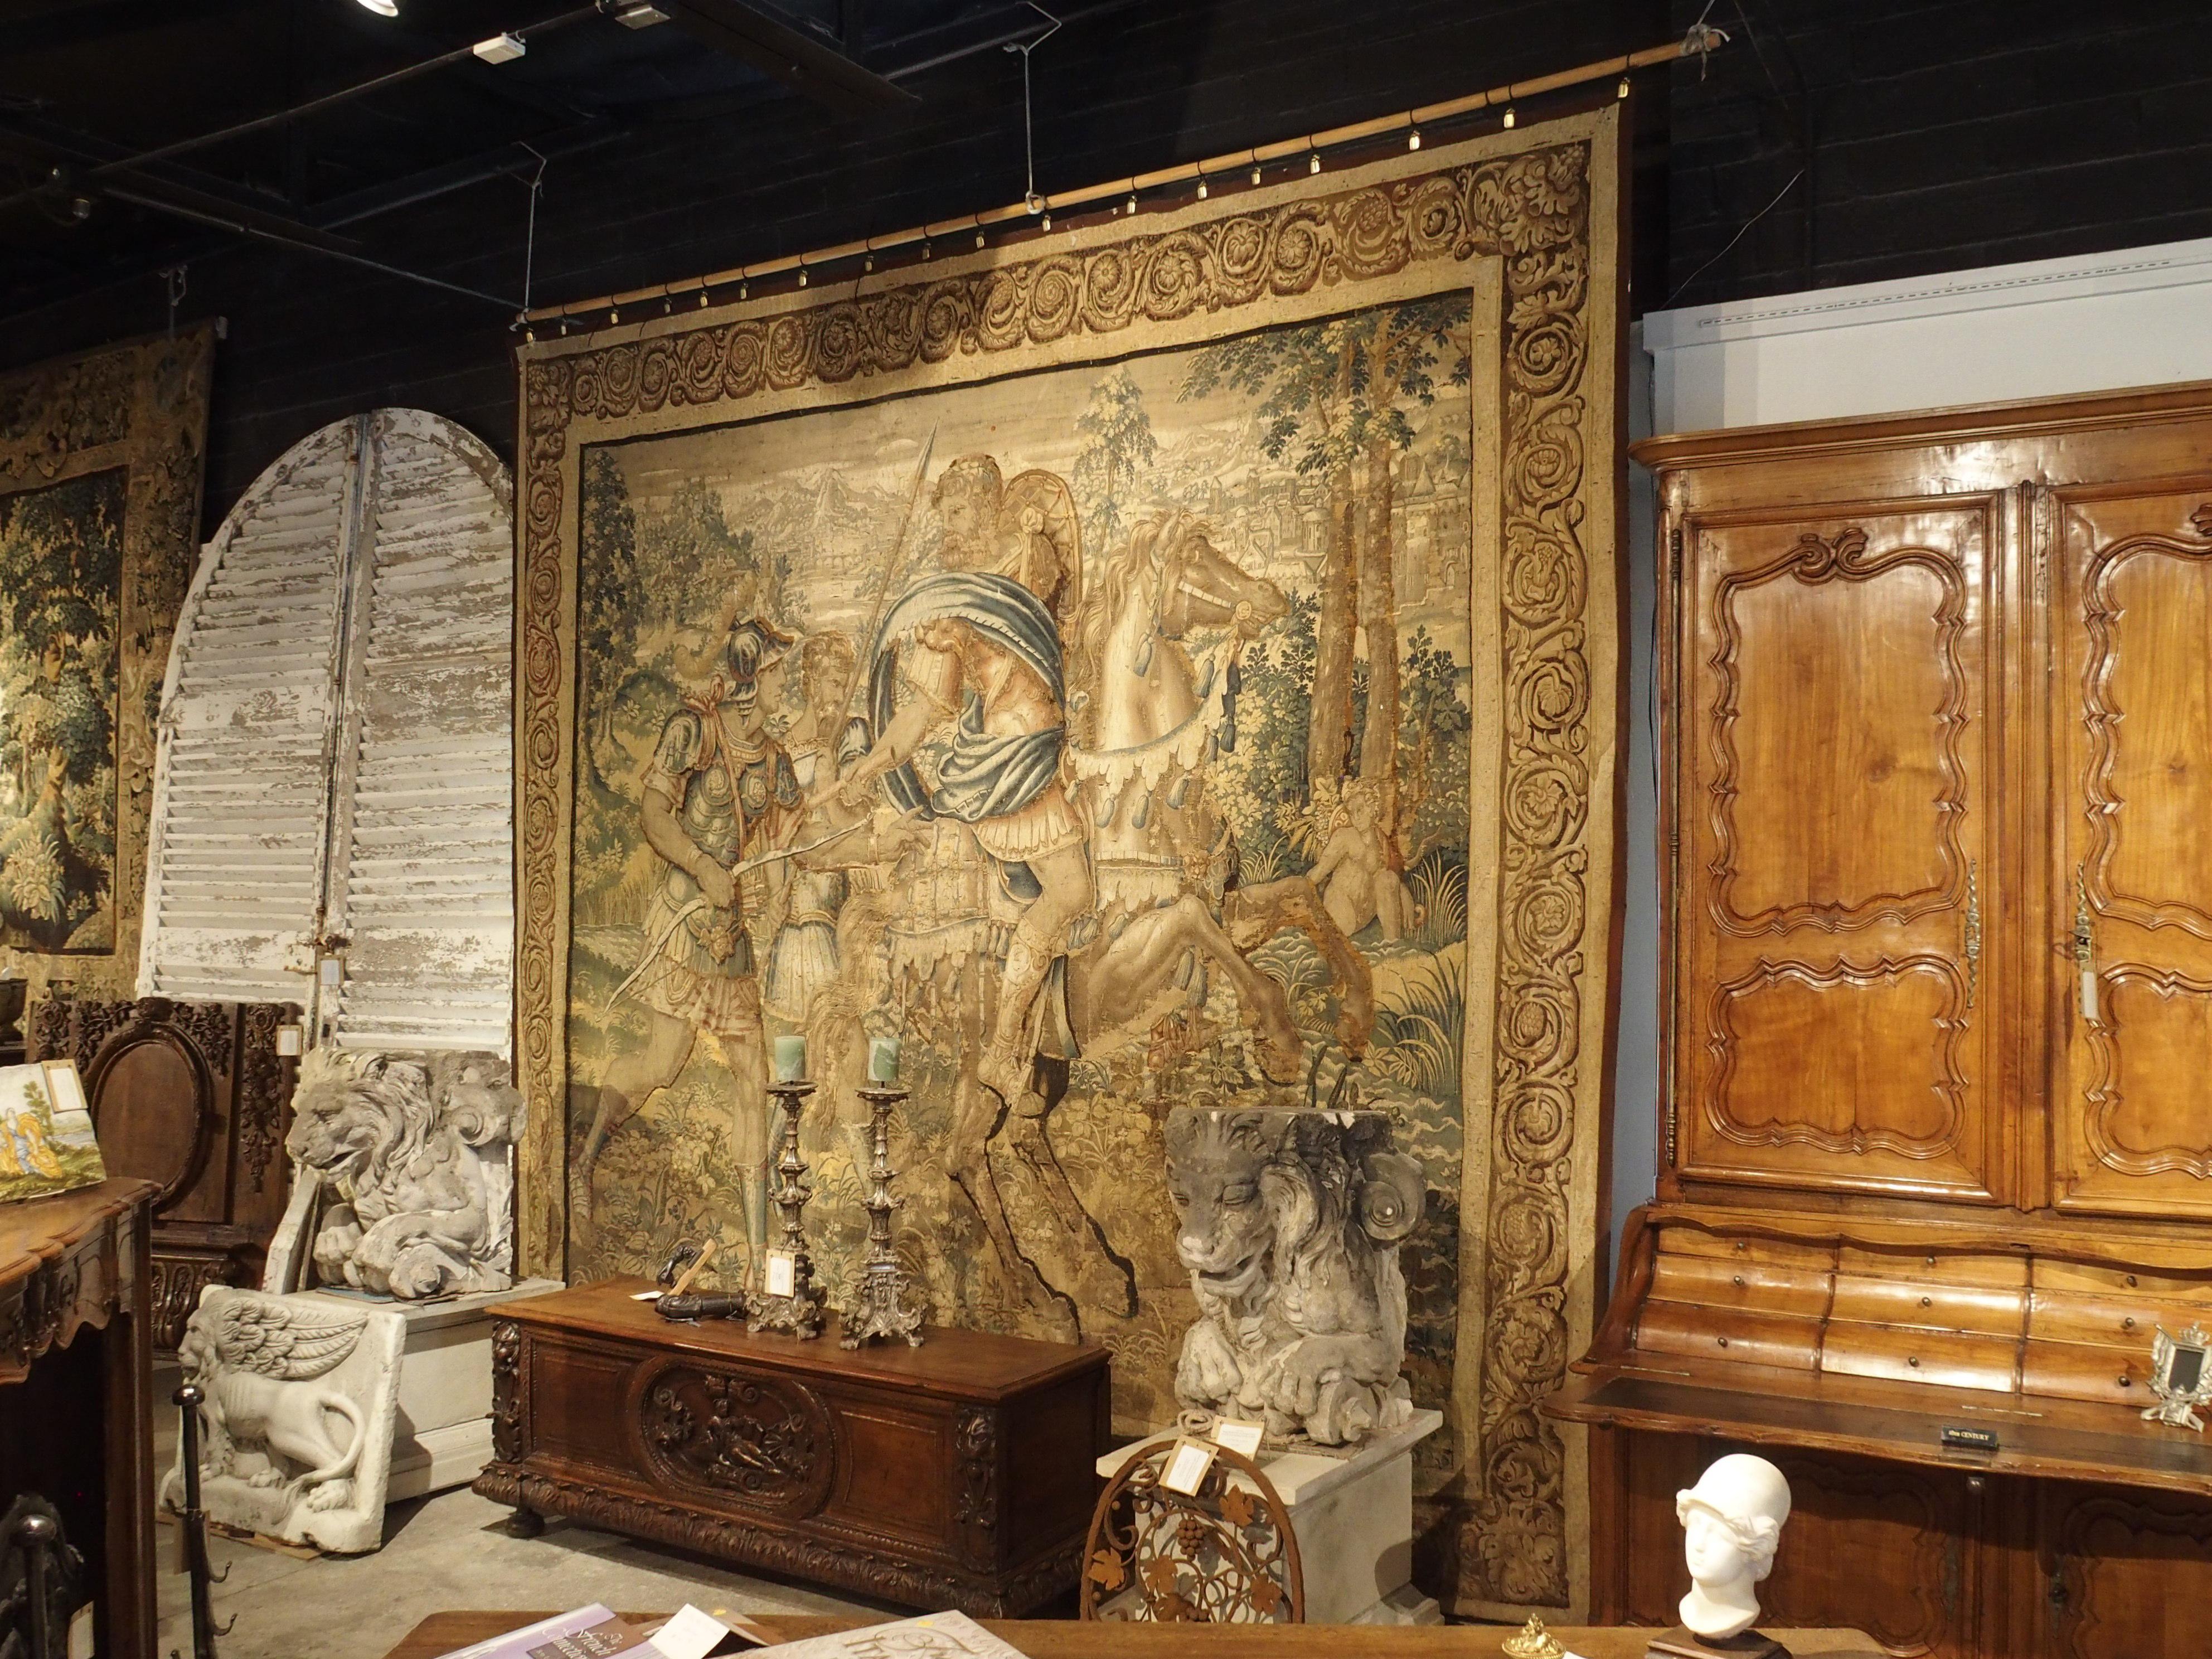 Woven Large 17th Century Flanders Tapestry Depicting a Roman Scene